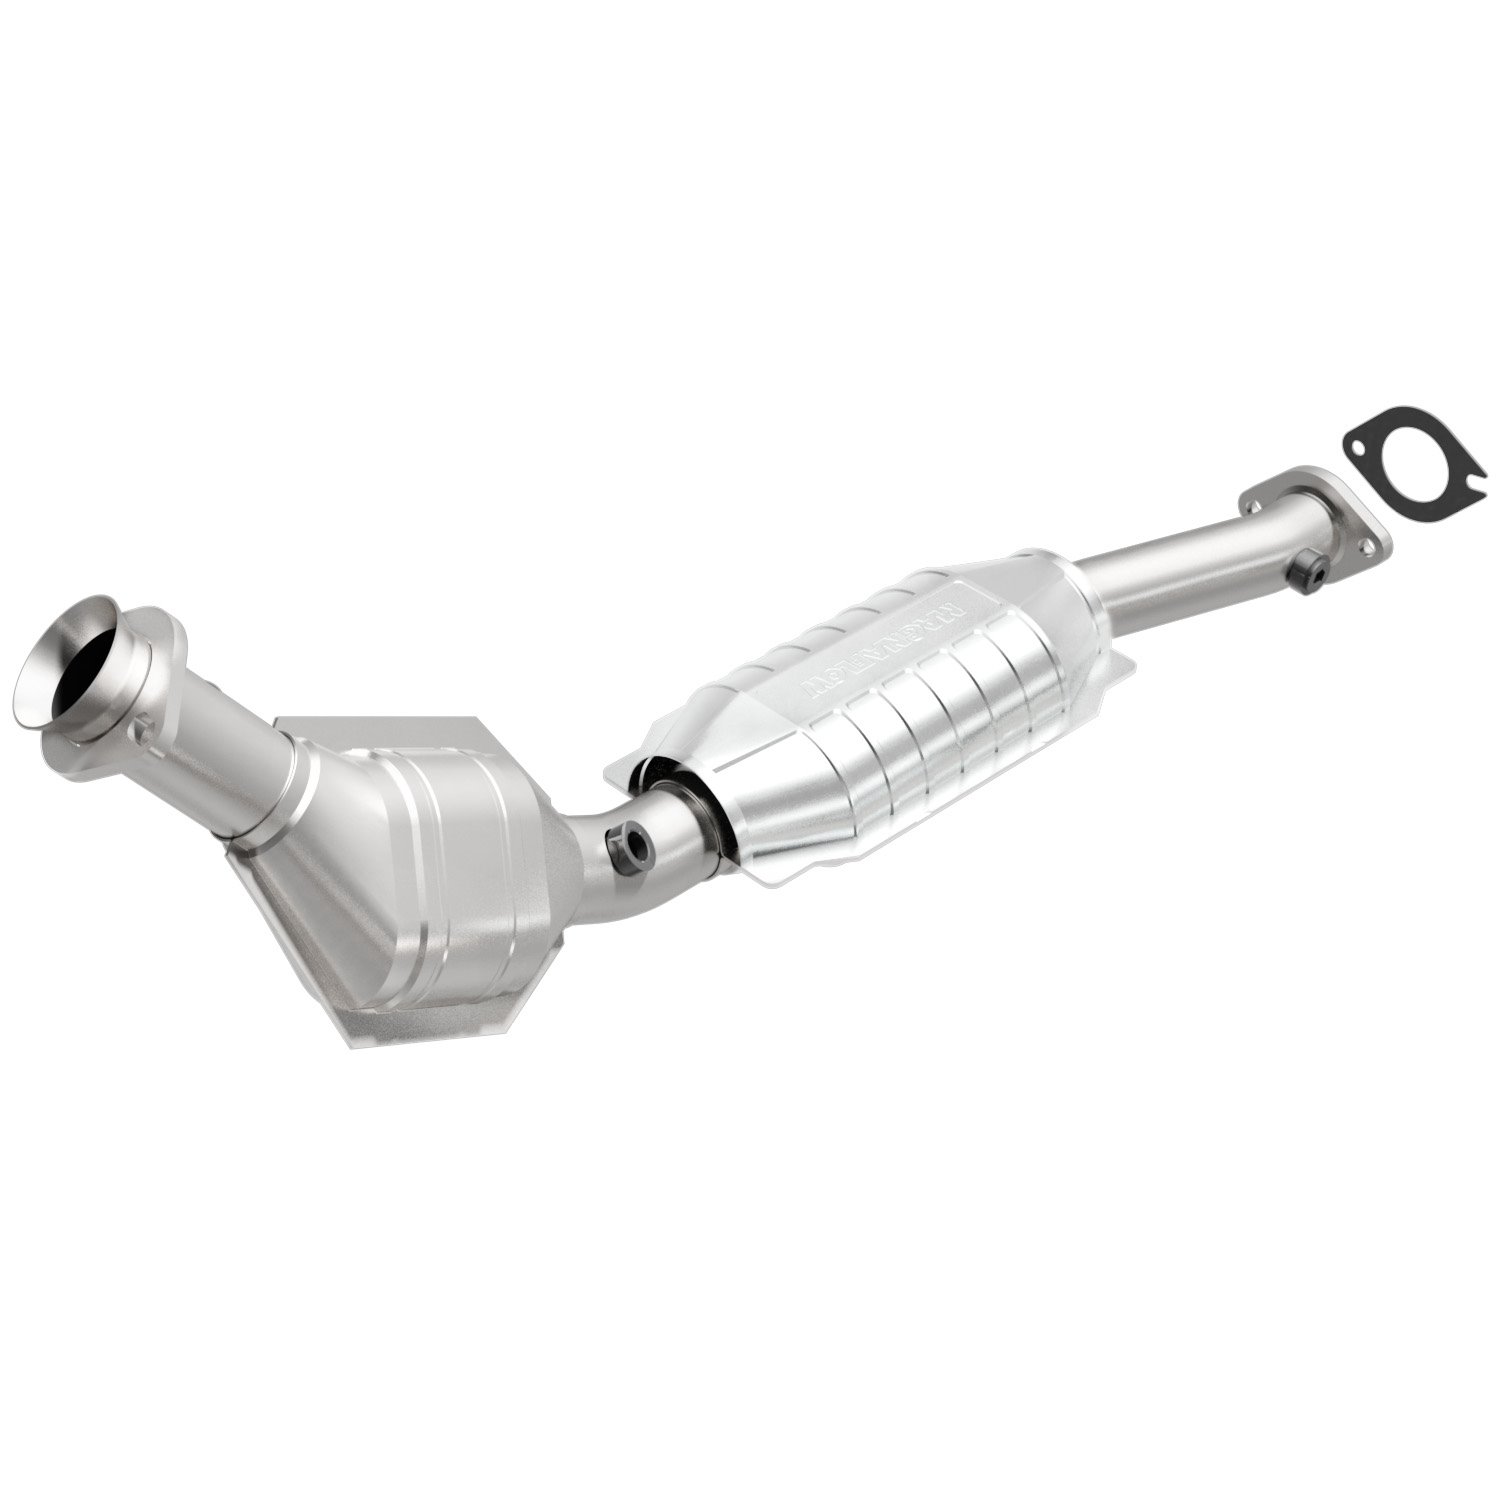 HM Grade Federal / EPA Compliant Direct-Fit Catalytic Converter 23327